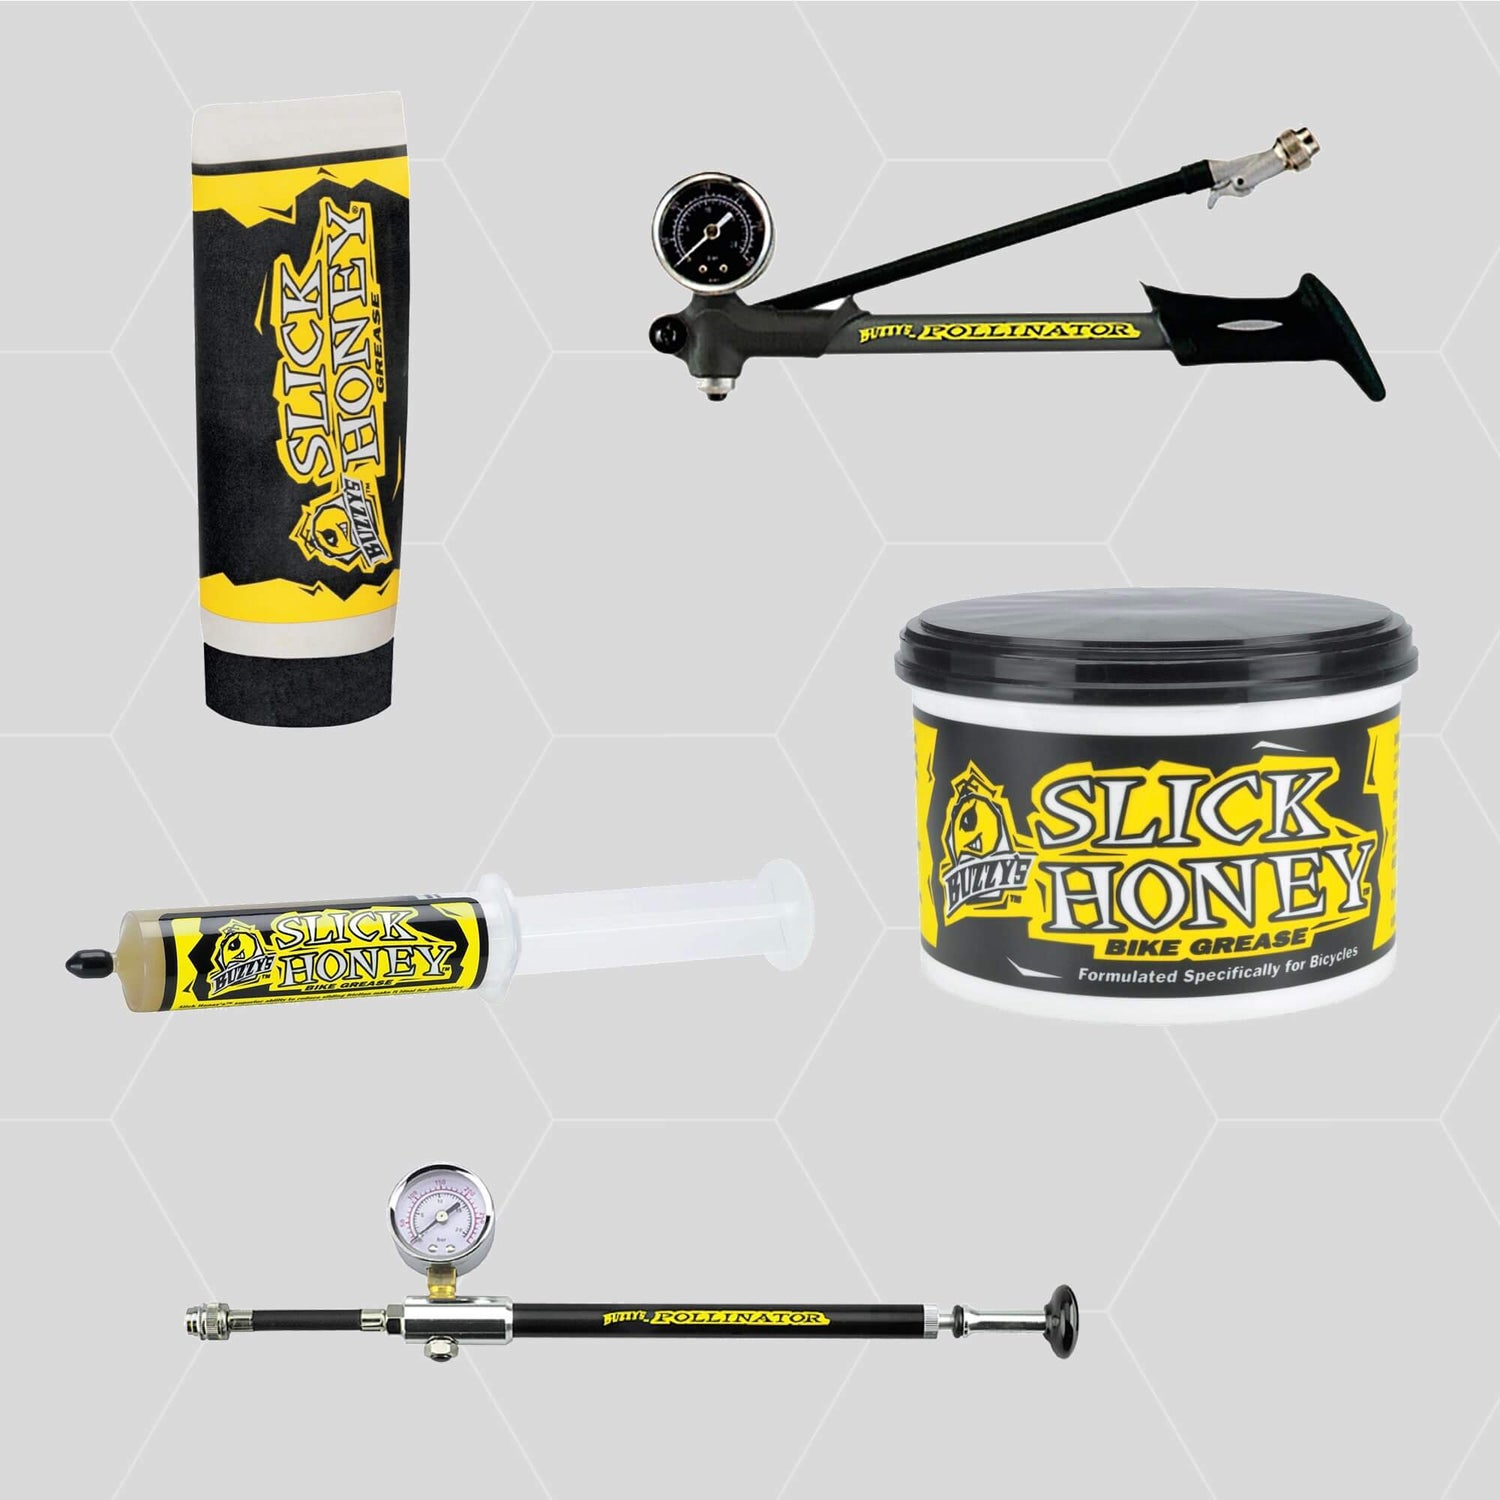 A collage of Buzzy's bike grease and shock pump products featured on a gray honeycomb background